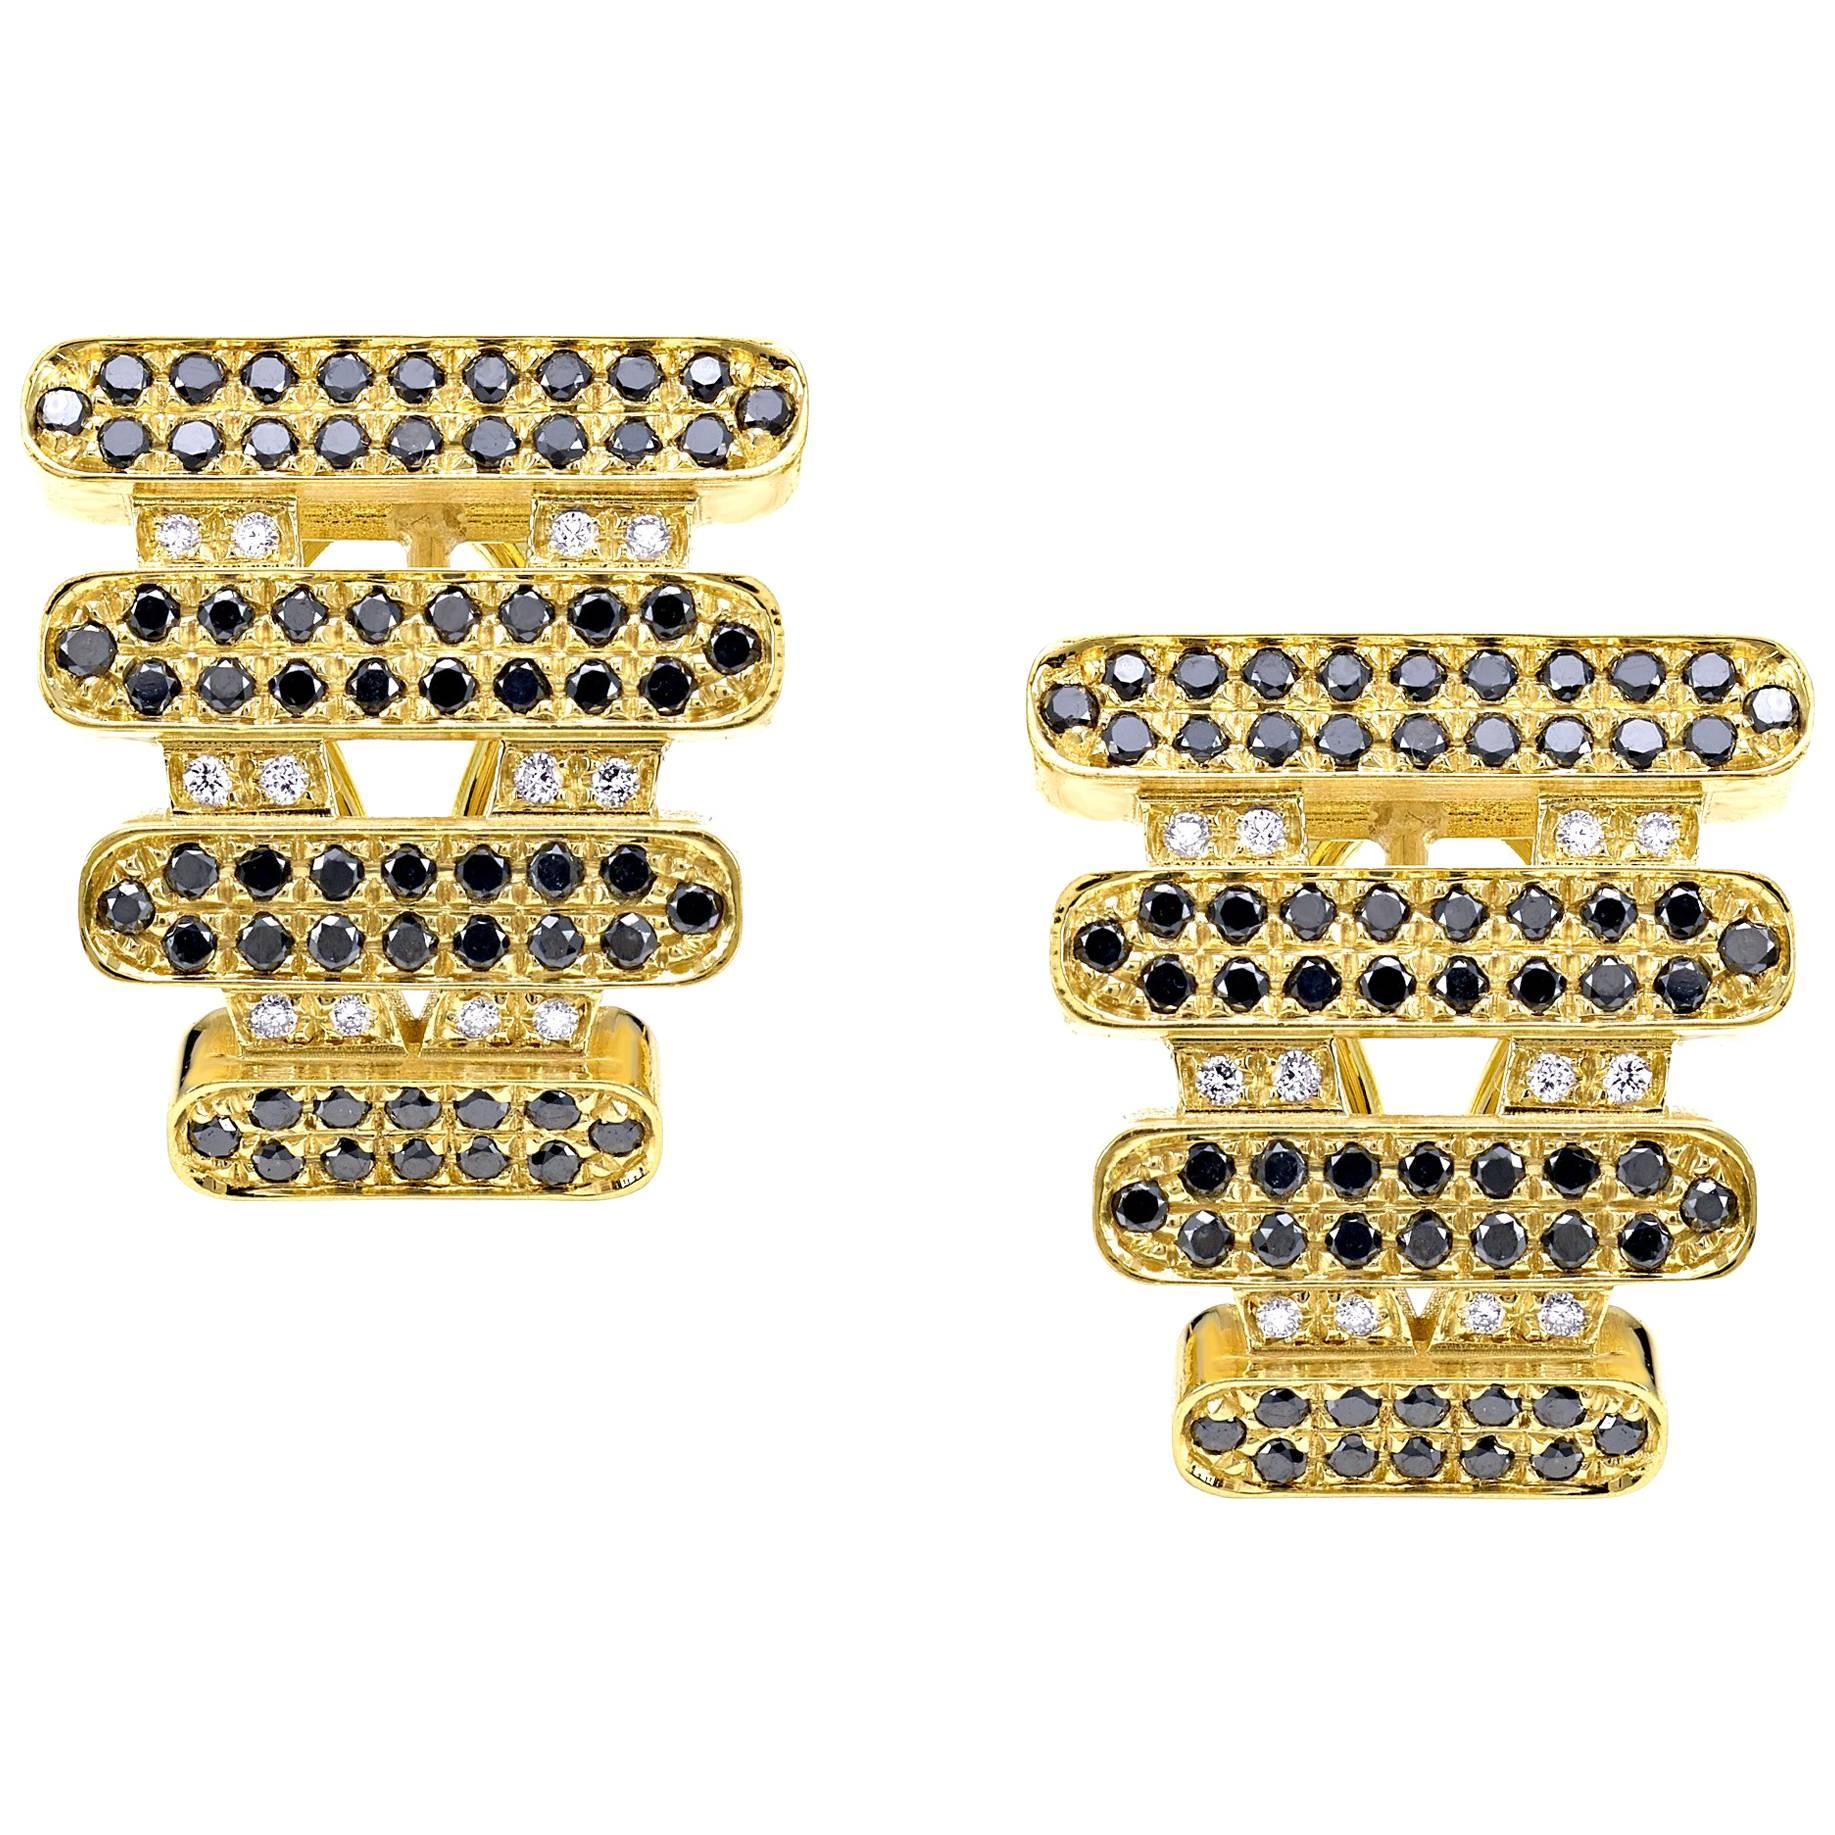 Earrings Collection "Moonlight" 18 Karat Yellow Gold and Diamonds For Sale